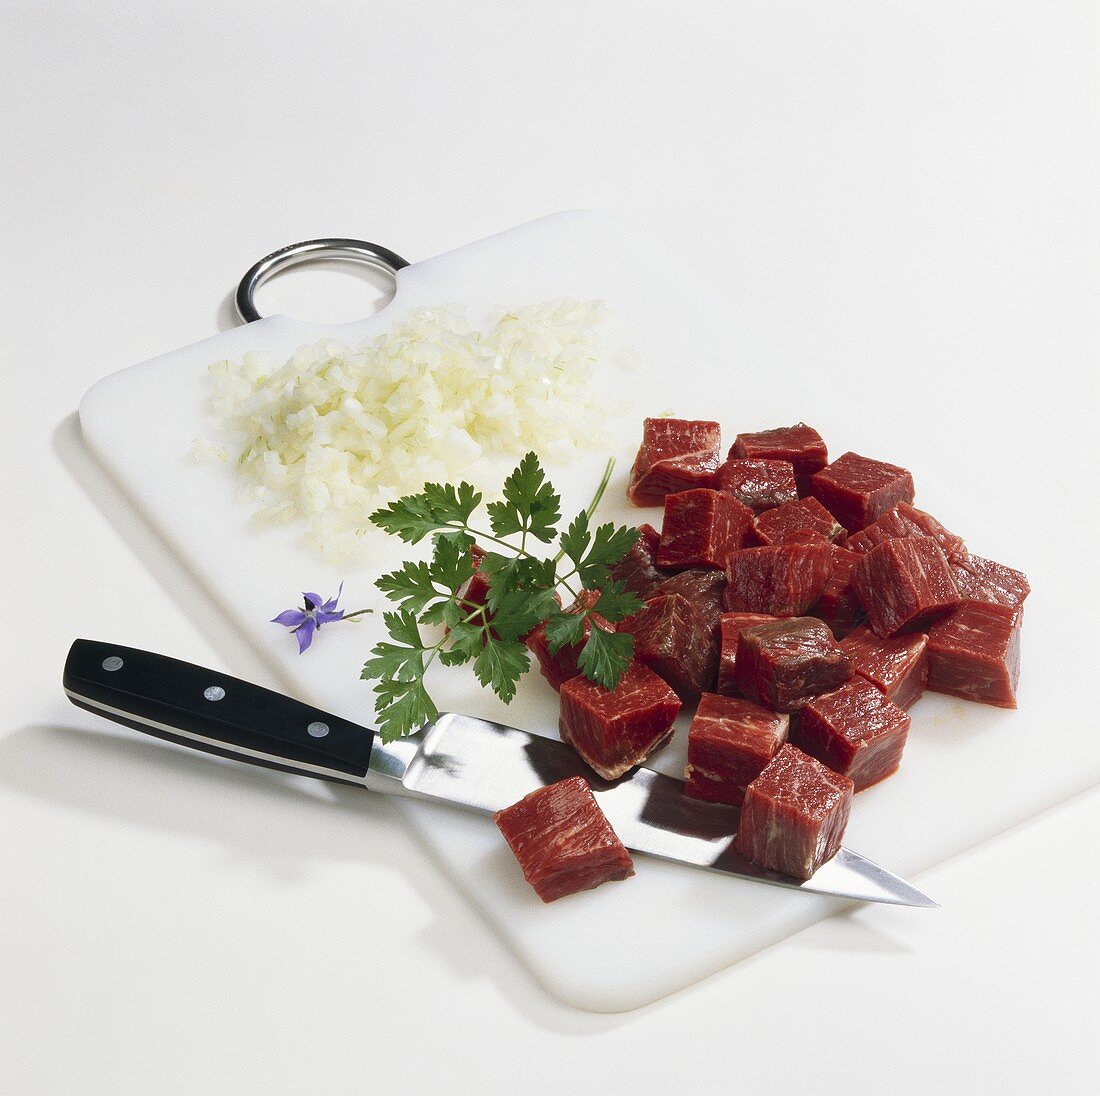 Beef and onions, diced, parsley and knife